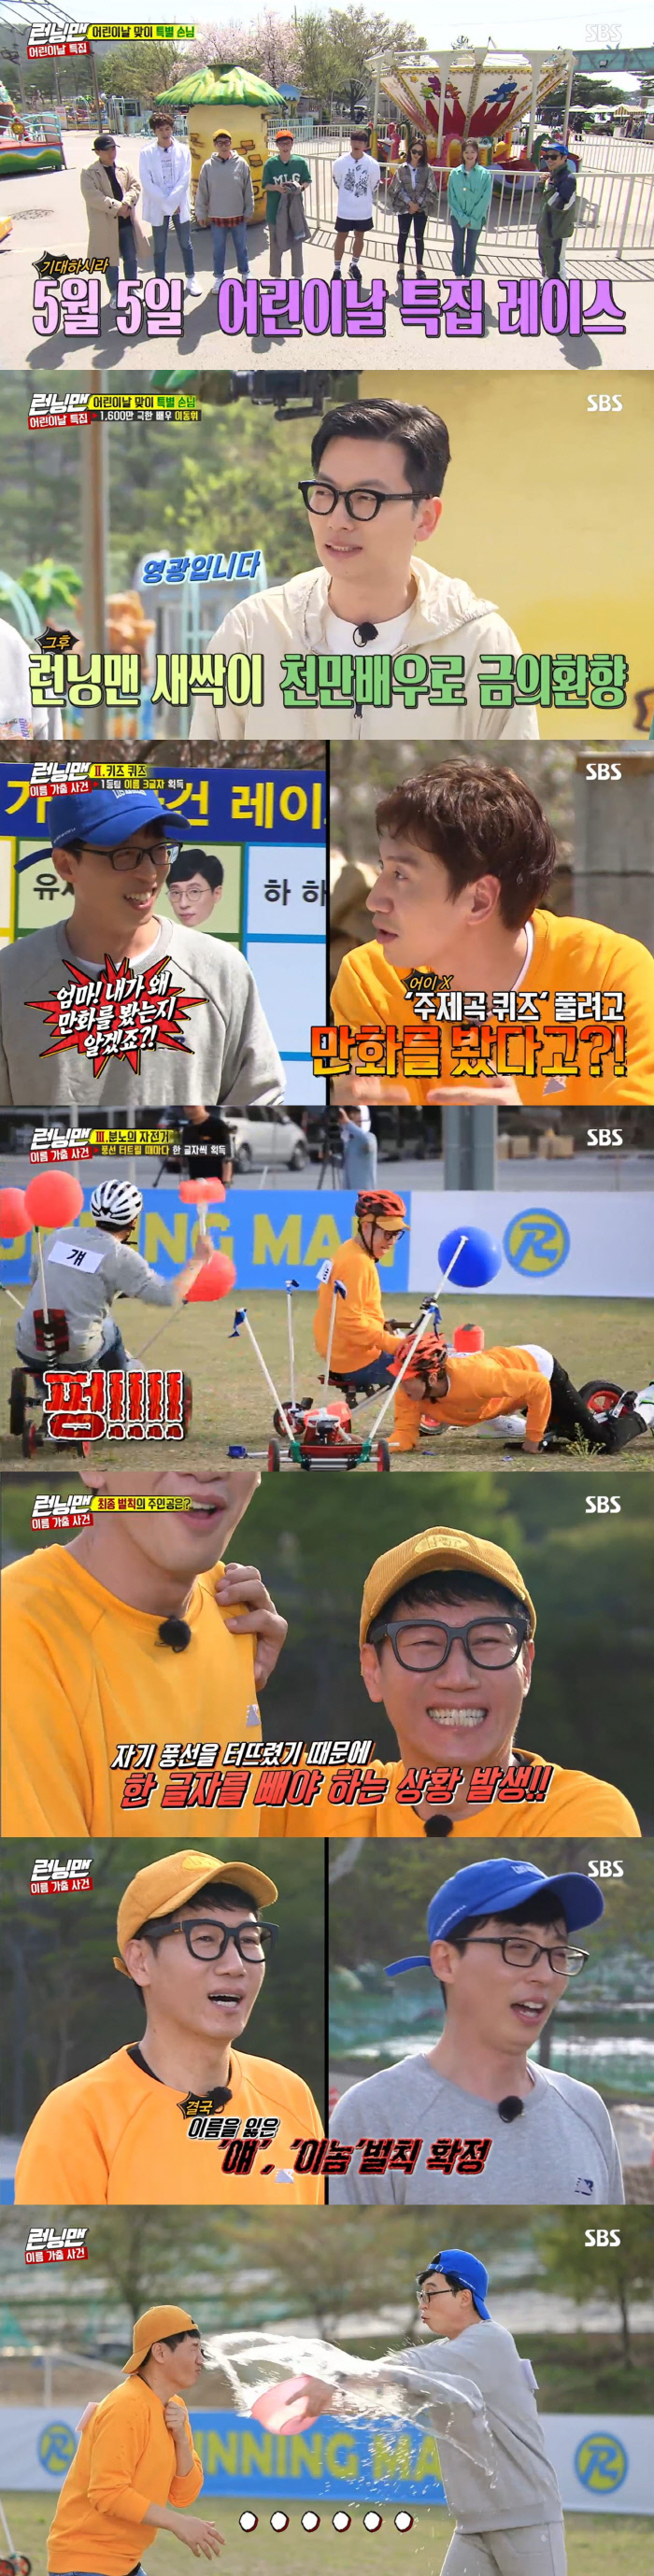 Yoo Jae-Suk and Ji Suk-jin became the main characters of the best one minute.According to Nielsen Korea, the average audience rating of SBS entertainment program Running Man, which was broadcast on the 5th, was 4.2% in the first part and 5.9% in the second part (based on the audience rating of households in the metropolitan area).The highest audience rating per minute was 6.4 percent.On this day, Running Man was decorated with the special Name Runaway Case Race on Childrens Day, and the members went to Game to regain the name tag with their name.Guests included Yi Dong-hwi, who was about to release the movie Young Client; Father Avengers Ji Suk-jin, Yoo Jae-Suk, and Haha became team leaders.The Ji Suk-jin team was teamed by Lee Kwang-soo and Song Ji-hyoga, the Yoo Jae-Suk team was teamed by Yi Dong-hwi and Yang Se-chan, and the Haha team was teamed by Jeon So-min and Kim Jong-kook.Since then, a full-scale race has begun.The first game was an age of memories that the first team could acquire four letters of name, and the second was a Kids Quiz, where the first team could acquire three letters of name.The last mission is a tump-bump bike that can be found as much as necessary. Each time you ride a bicycle and burst the balloon of your opponent, you get one letter.In the first half, the ace Kim Jong-kooks performance led to the victory of the small teams (Kim Jong-kook, Haha and Jeon So-min) and the remaining two teams in the second half.Lee Kwang-soos baby tricycle failed to beat the weight and broke two dongs, and the same team Yi Dong-hwi was in crisis because only one remaining balloon remained.Eventually, the race ended with Yang Se-chan bursting Lee Kwang-soos remaining balloon.As Yoo Jae-Suk found Seok, Ji Suk-jin also found all the names, but Ji Suk-jin had to take one out at the end of his balloon.Lee Kwang-soo, who beat the scissors rock, took out the seat and Ji Suk-jin and Yoo Jae-Suk, who were not completed, were punished for the water.The scene recorded the highest audience rating of 6.4% per minute, accounting for the best one minute.